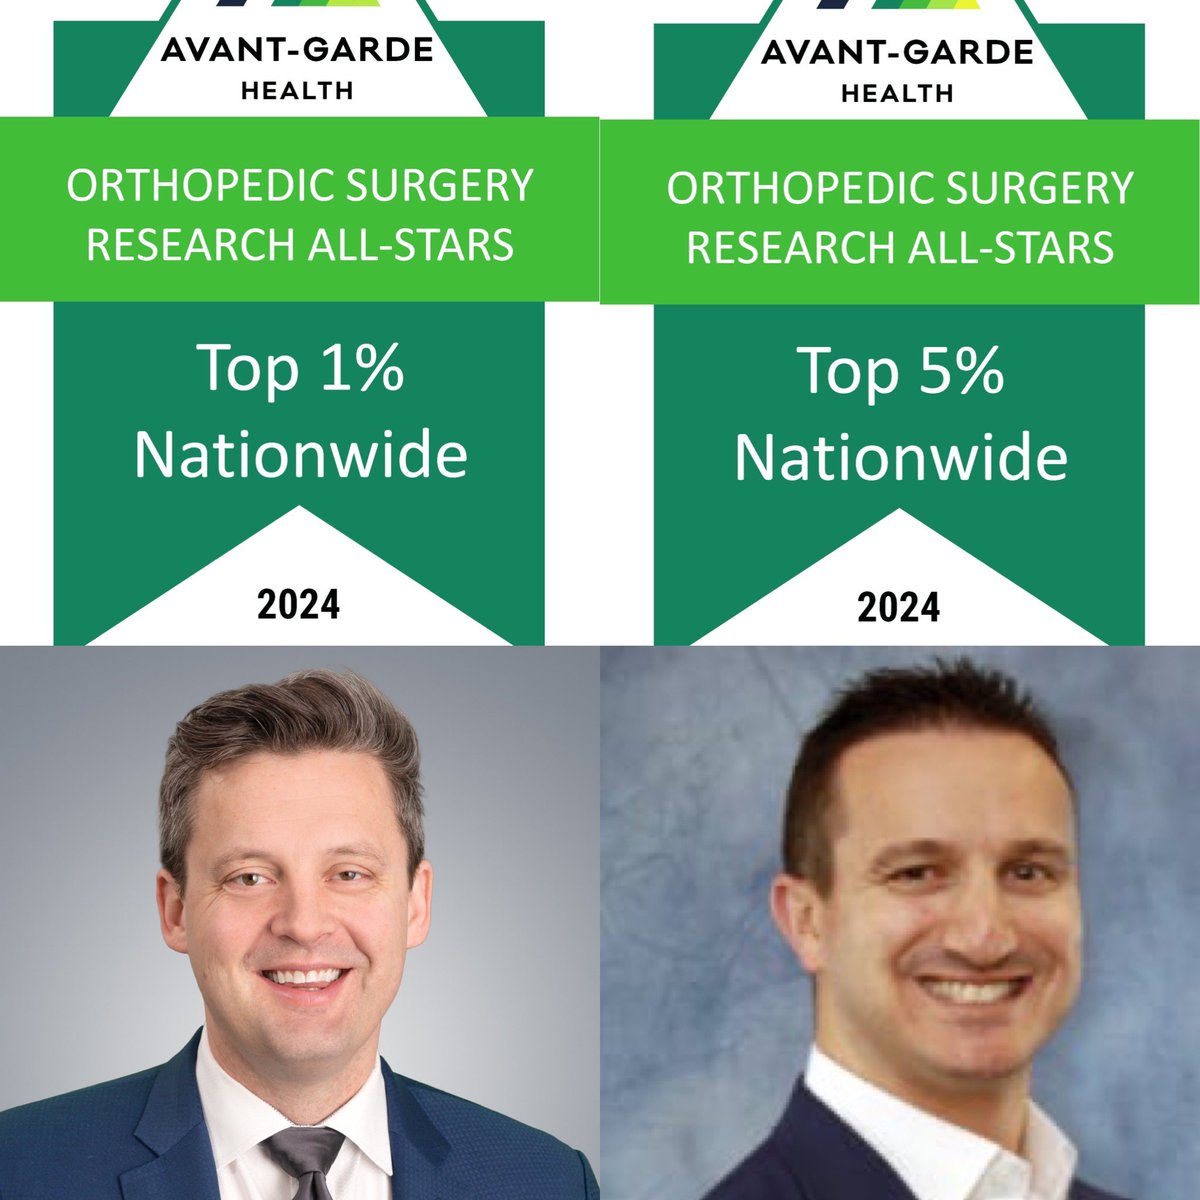 We're honored that Dr Eric Wagner (1%) and Dr Michael Gottschalk (5%) were 2024 Orthopaedic Research All-Star! This celebrates the significant research contributions I've made through co-authored publications. The #HealthcareResearchAllStars lists, curated by @Avant-garde Health